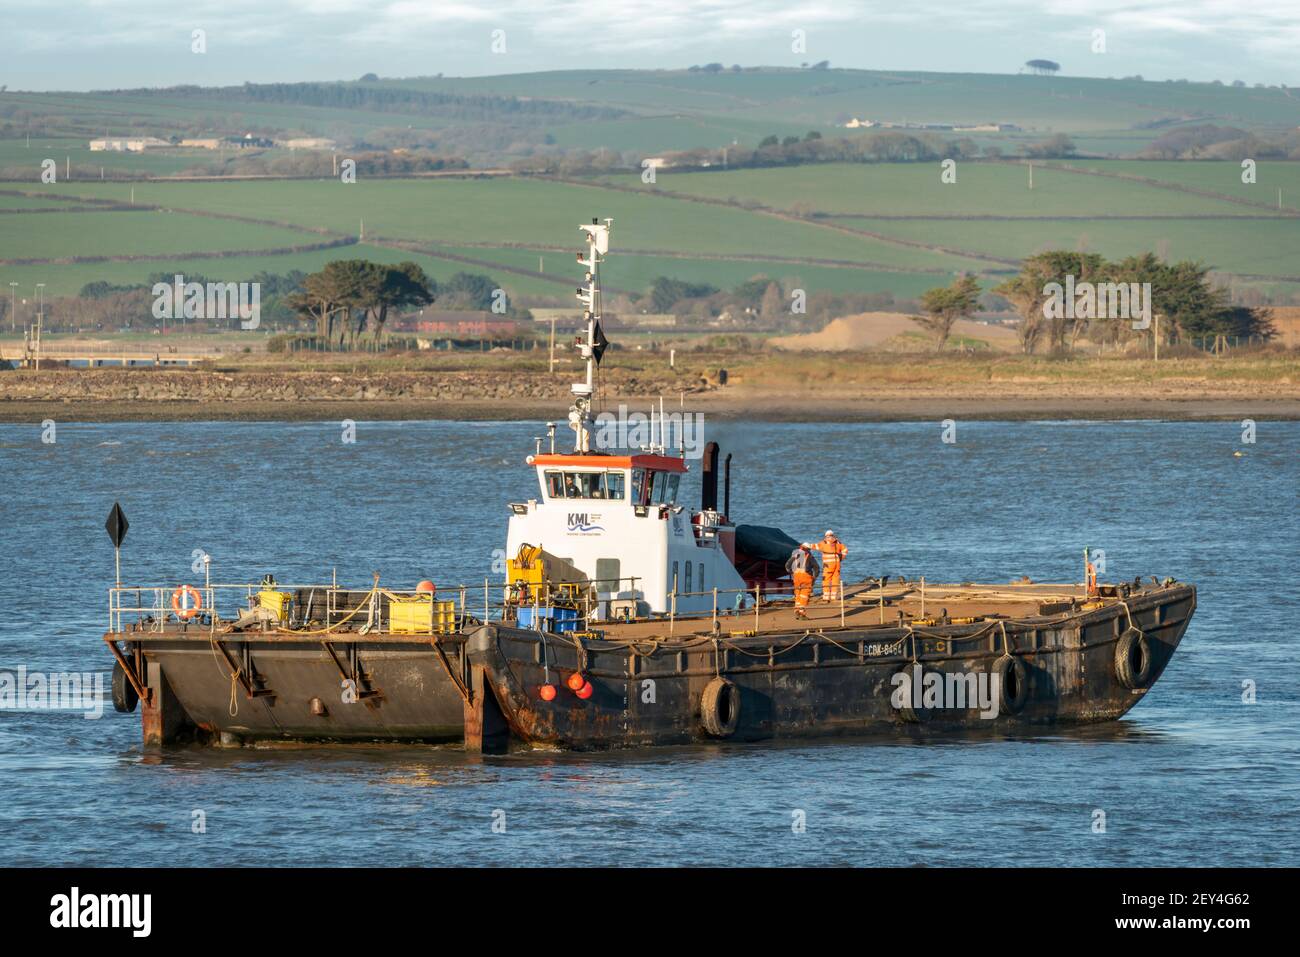 27th February 2021 - The first new refit order for the historic shipyard at Appledore in North Devon since being taken over by Harland & Wolff. The 38 Stock Photo